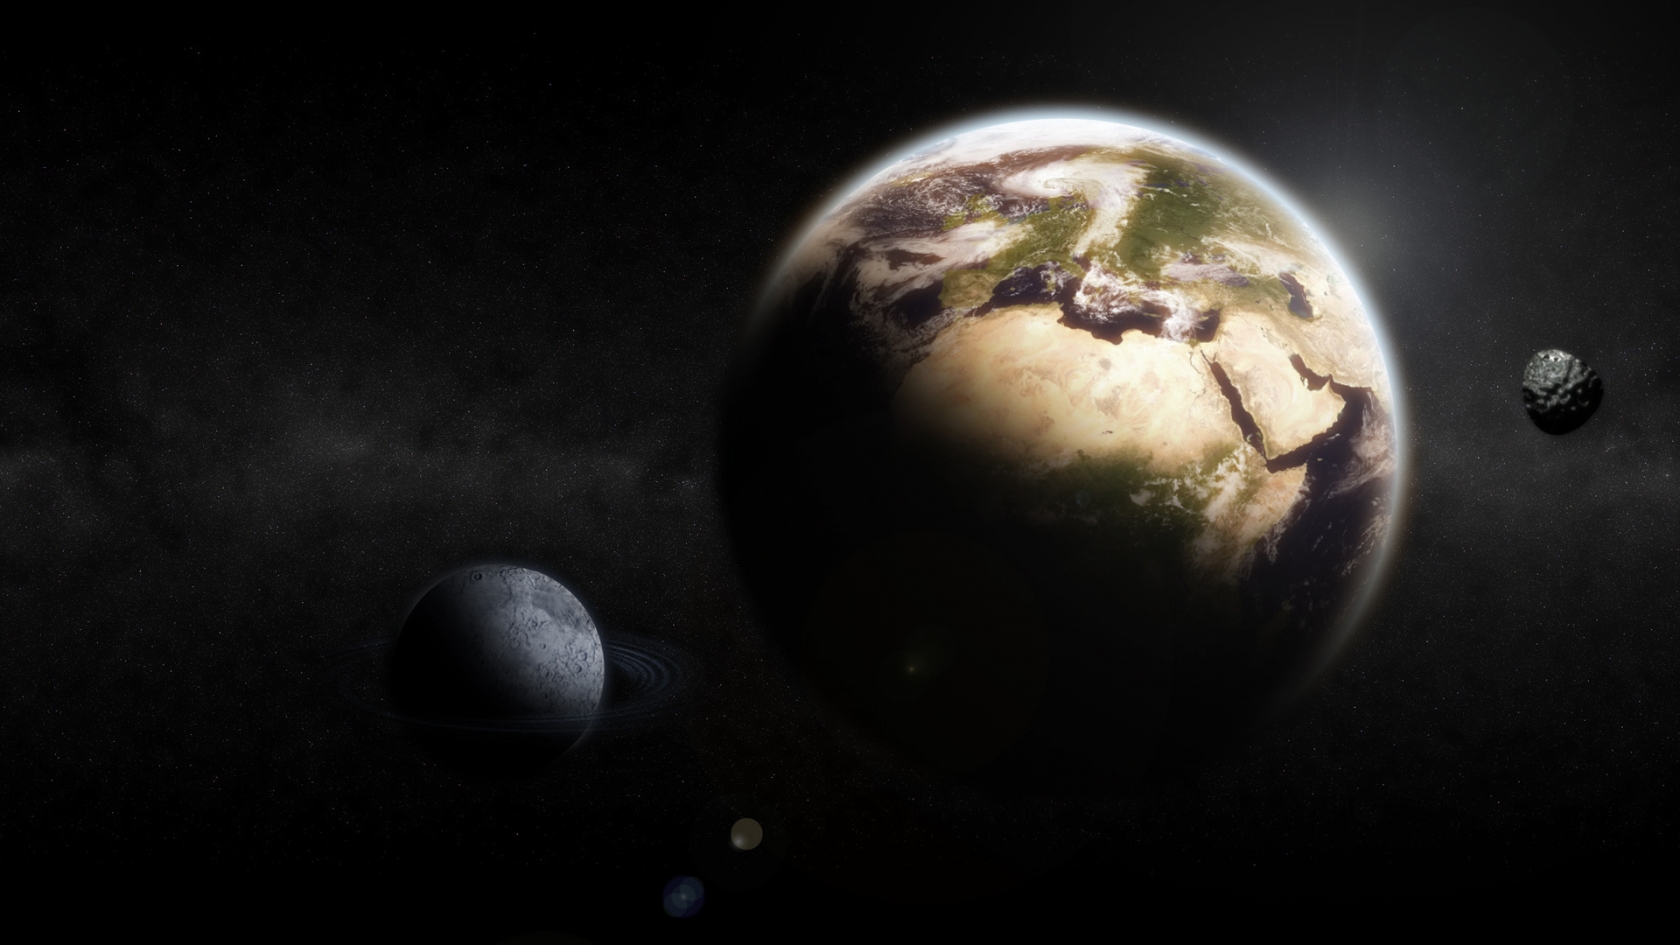 Earth & Moon for 1680 x 945 HDTV resolution